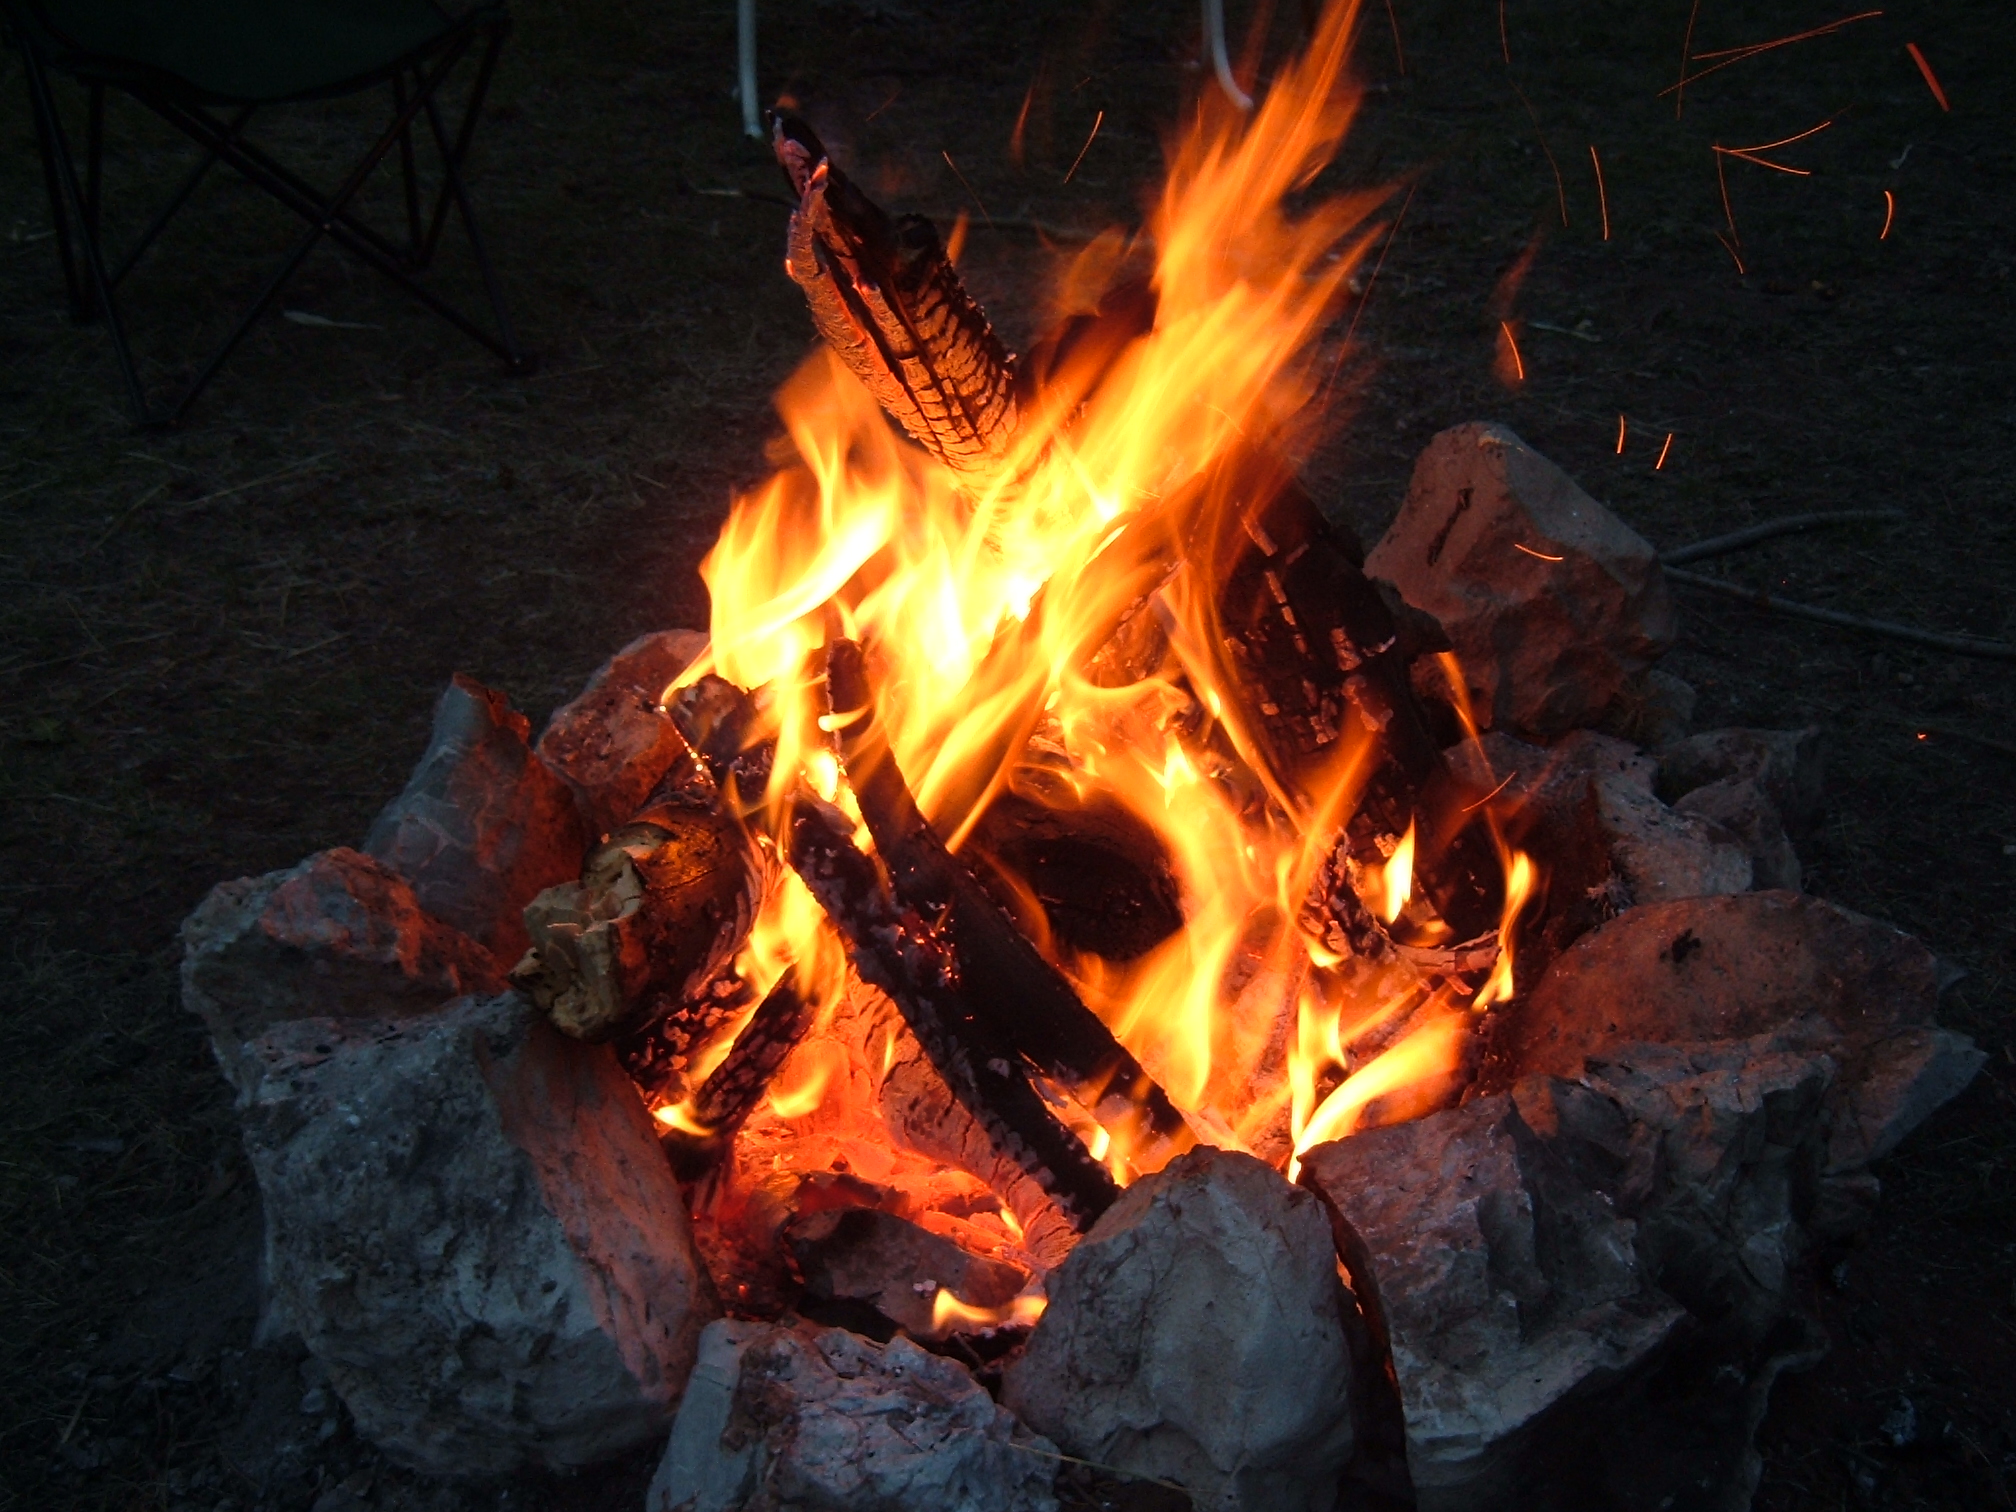 Camp Fire Safety